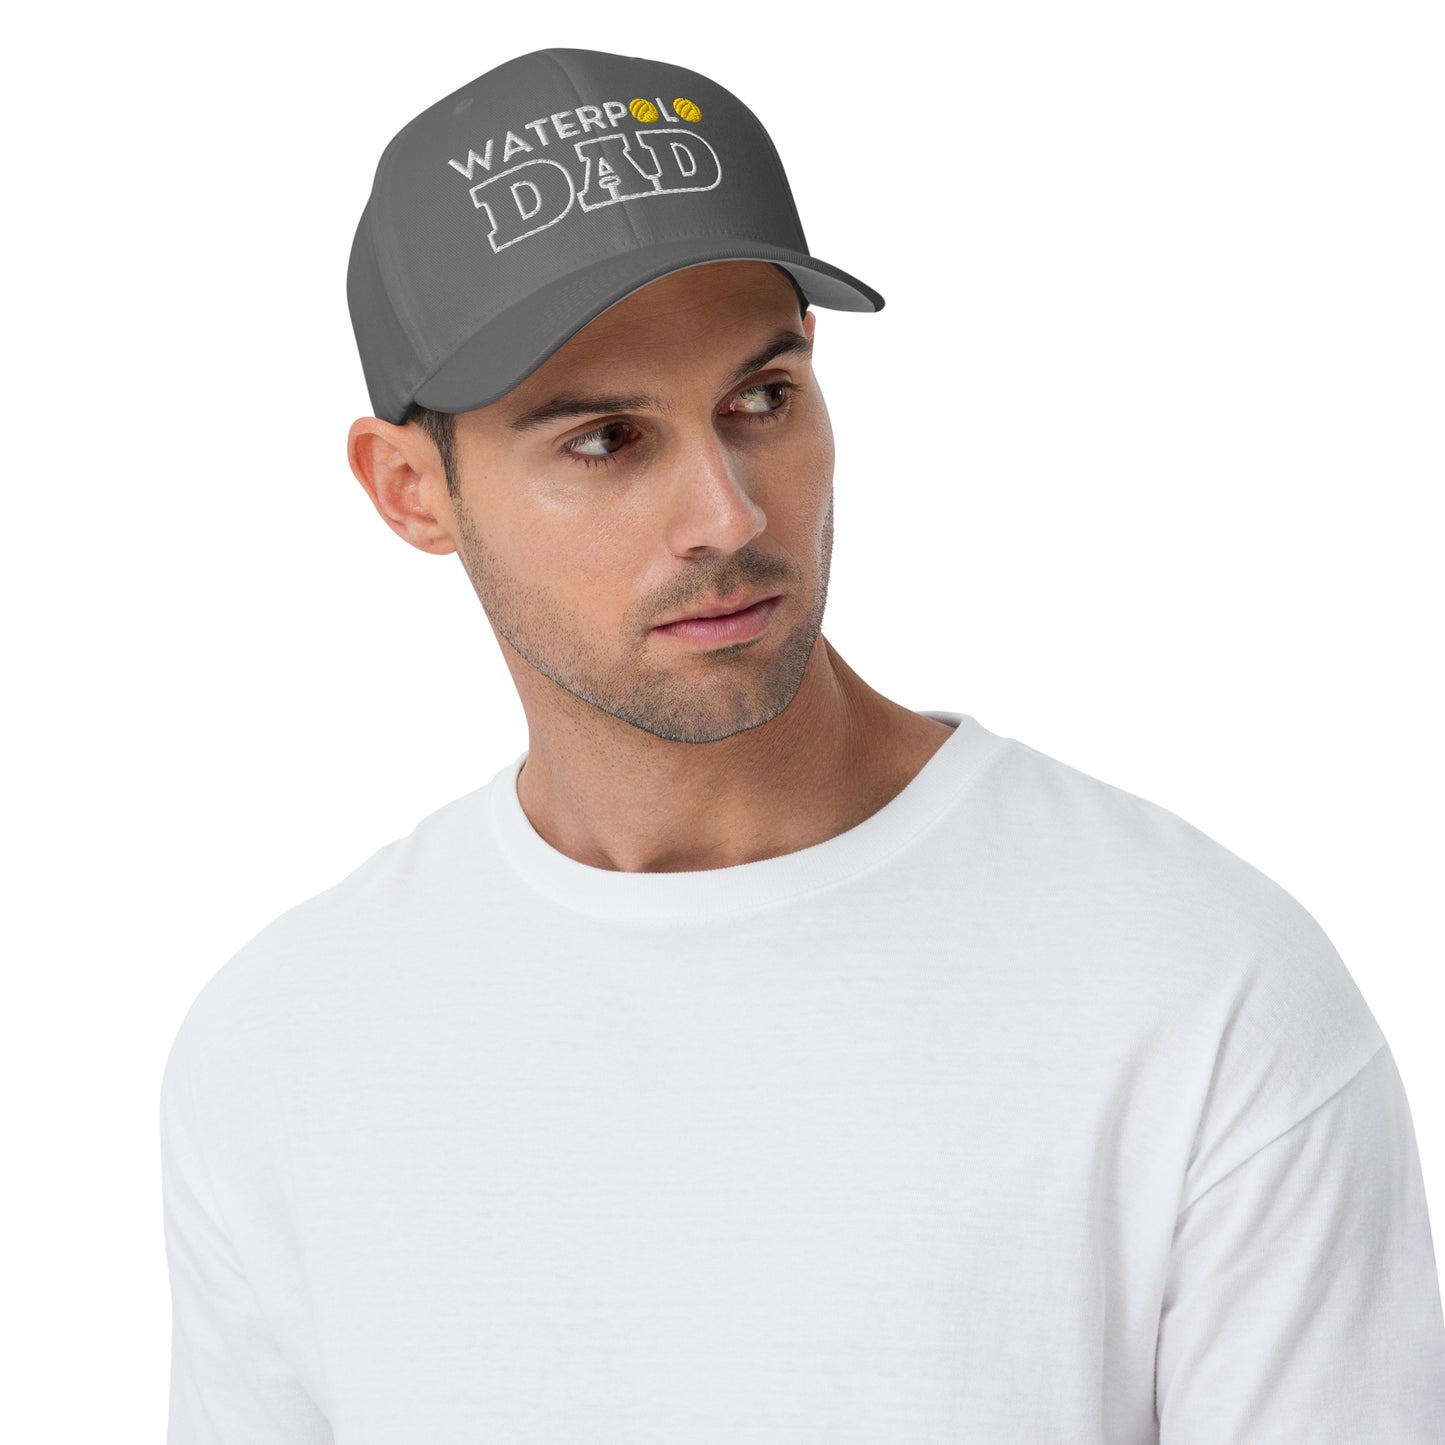 Waterpolo Dad - Embroidered Closed-Back Structured Cap | Flexfit 6277